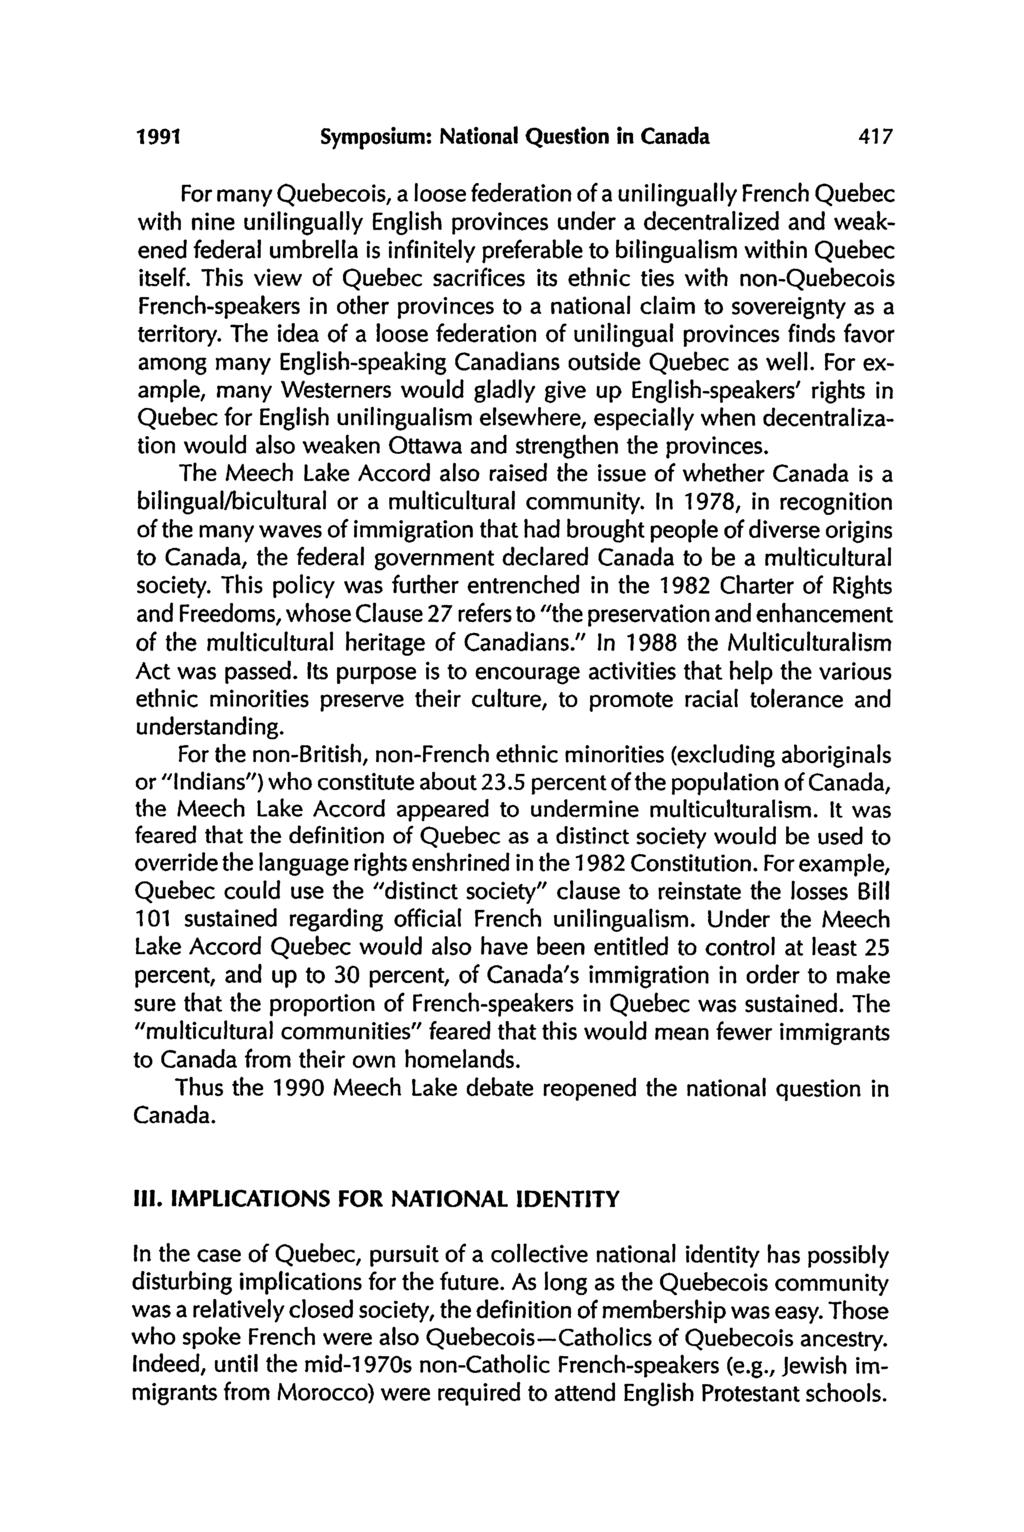 1991 Symposium: National Question in Canada 417 For many Quebecois, a loose federation of a unilingually French Quebec with nine unilingually English provinces under a decentralized and weakened